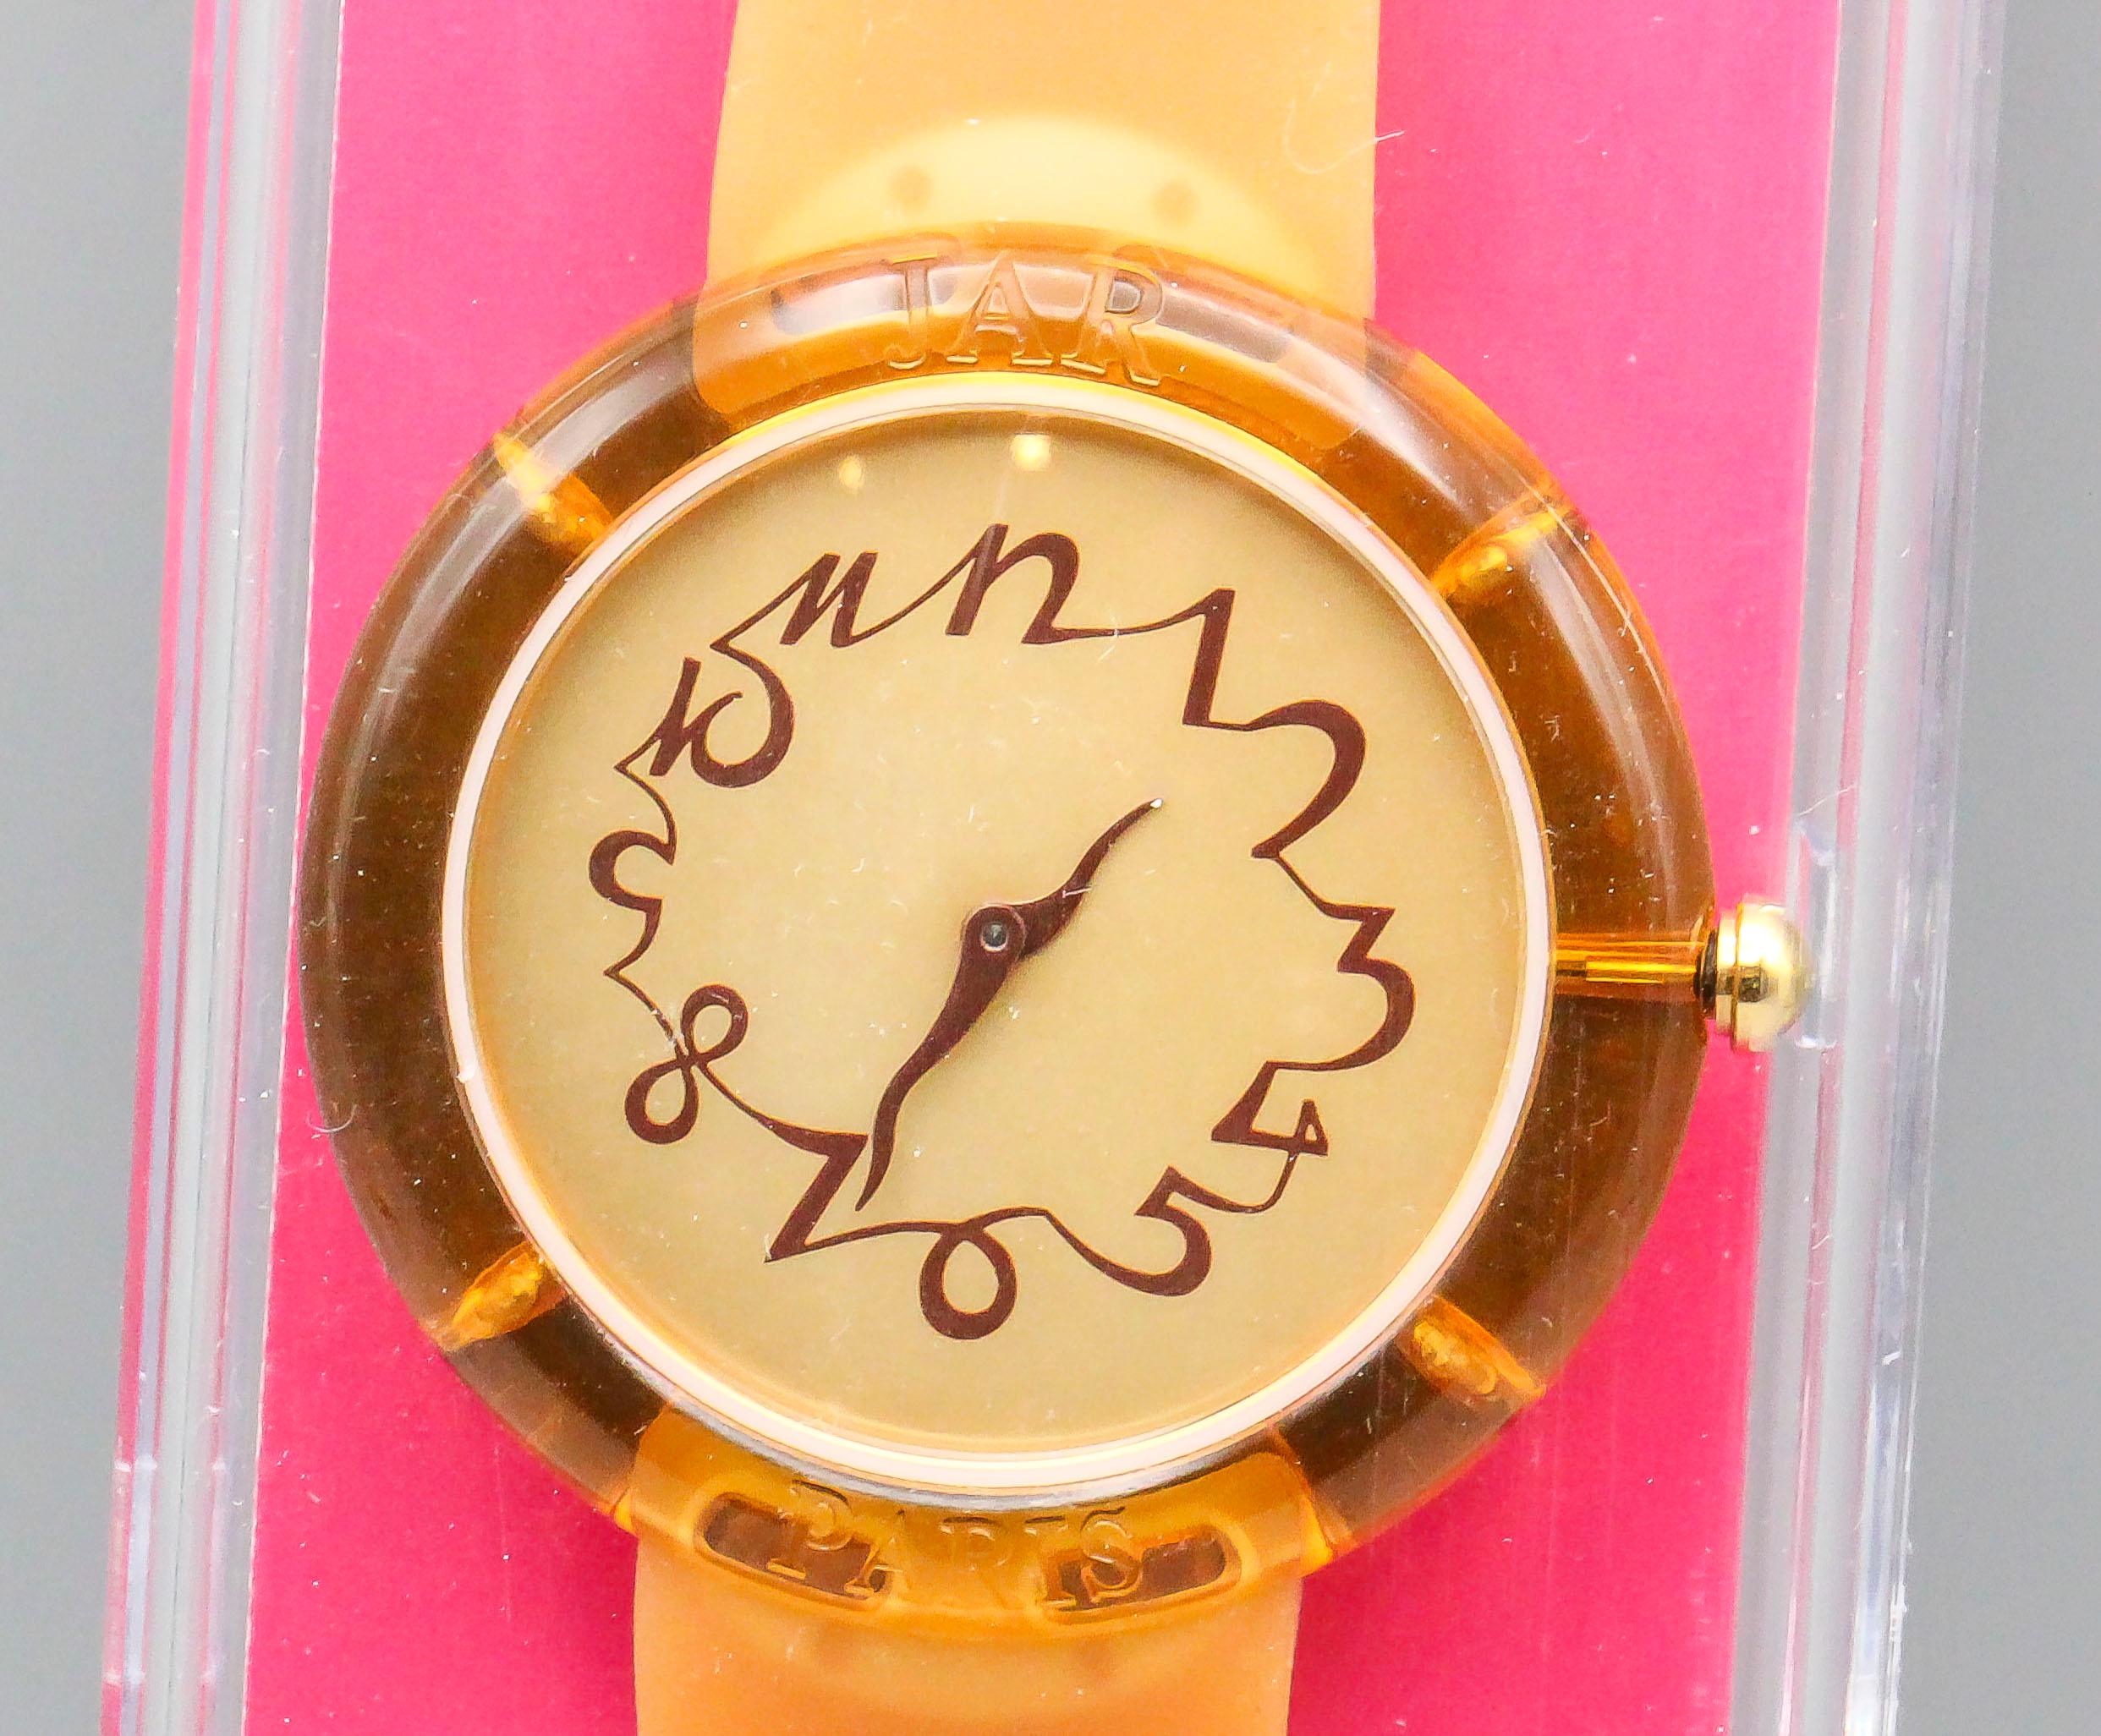 Jar Paris Met Museum Orange Honey Wrist Watch New in Box In Excellent Condition For Sale In New York, NY